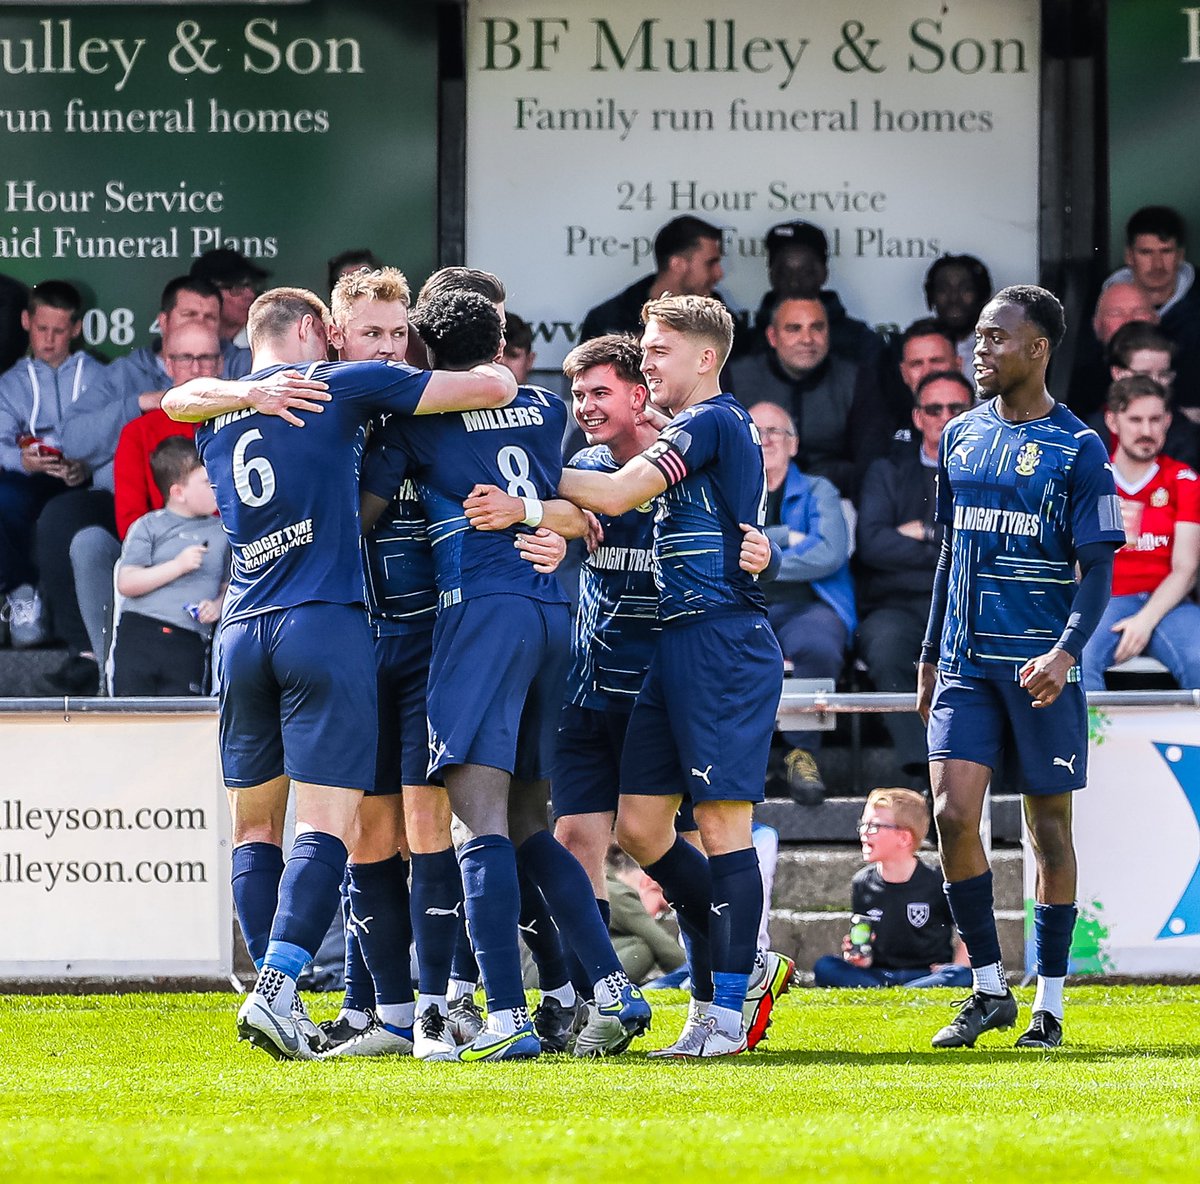 1️⃣ Year Ago Today! @AveleyFC defeated Hornchurch in the Isthmian Play-Off Final 1-0 to secure promotion to the National South for the first time in our history. 📸: @Lambpix1 #BackTheMillers | #TogetherAveley